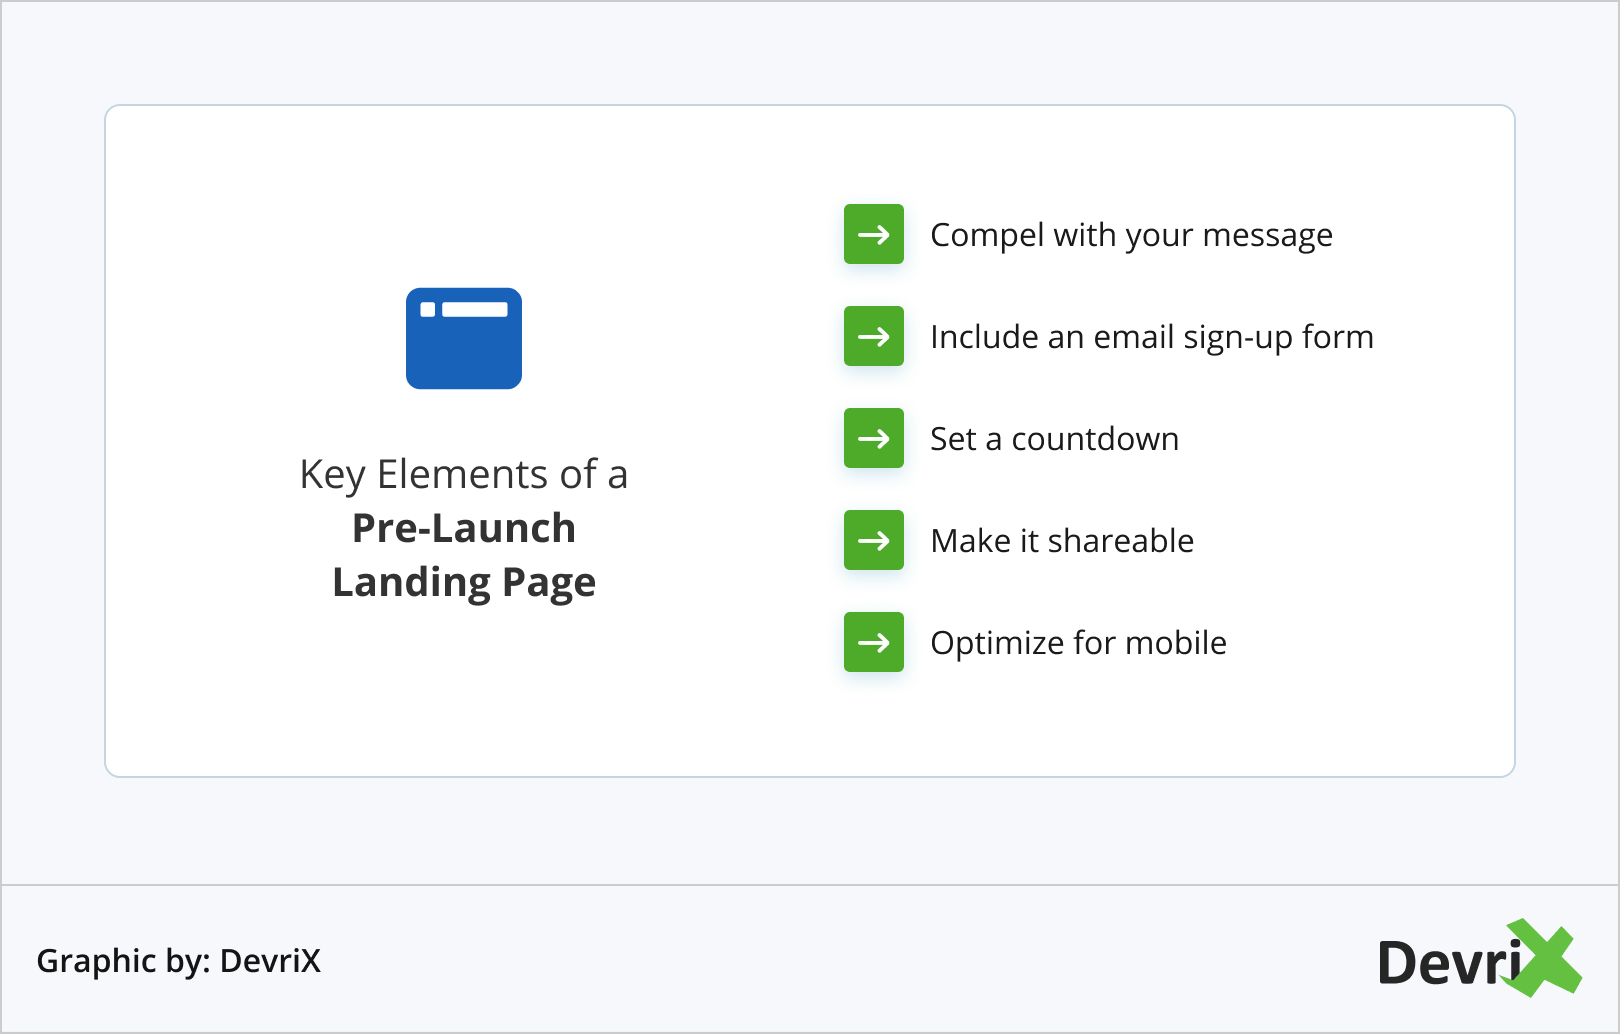 Key Elements of a Pre-Launch Landing Page